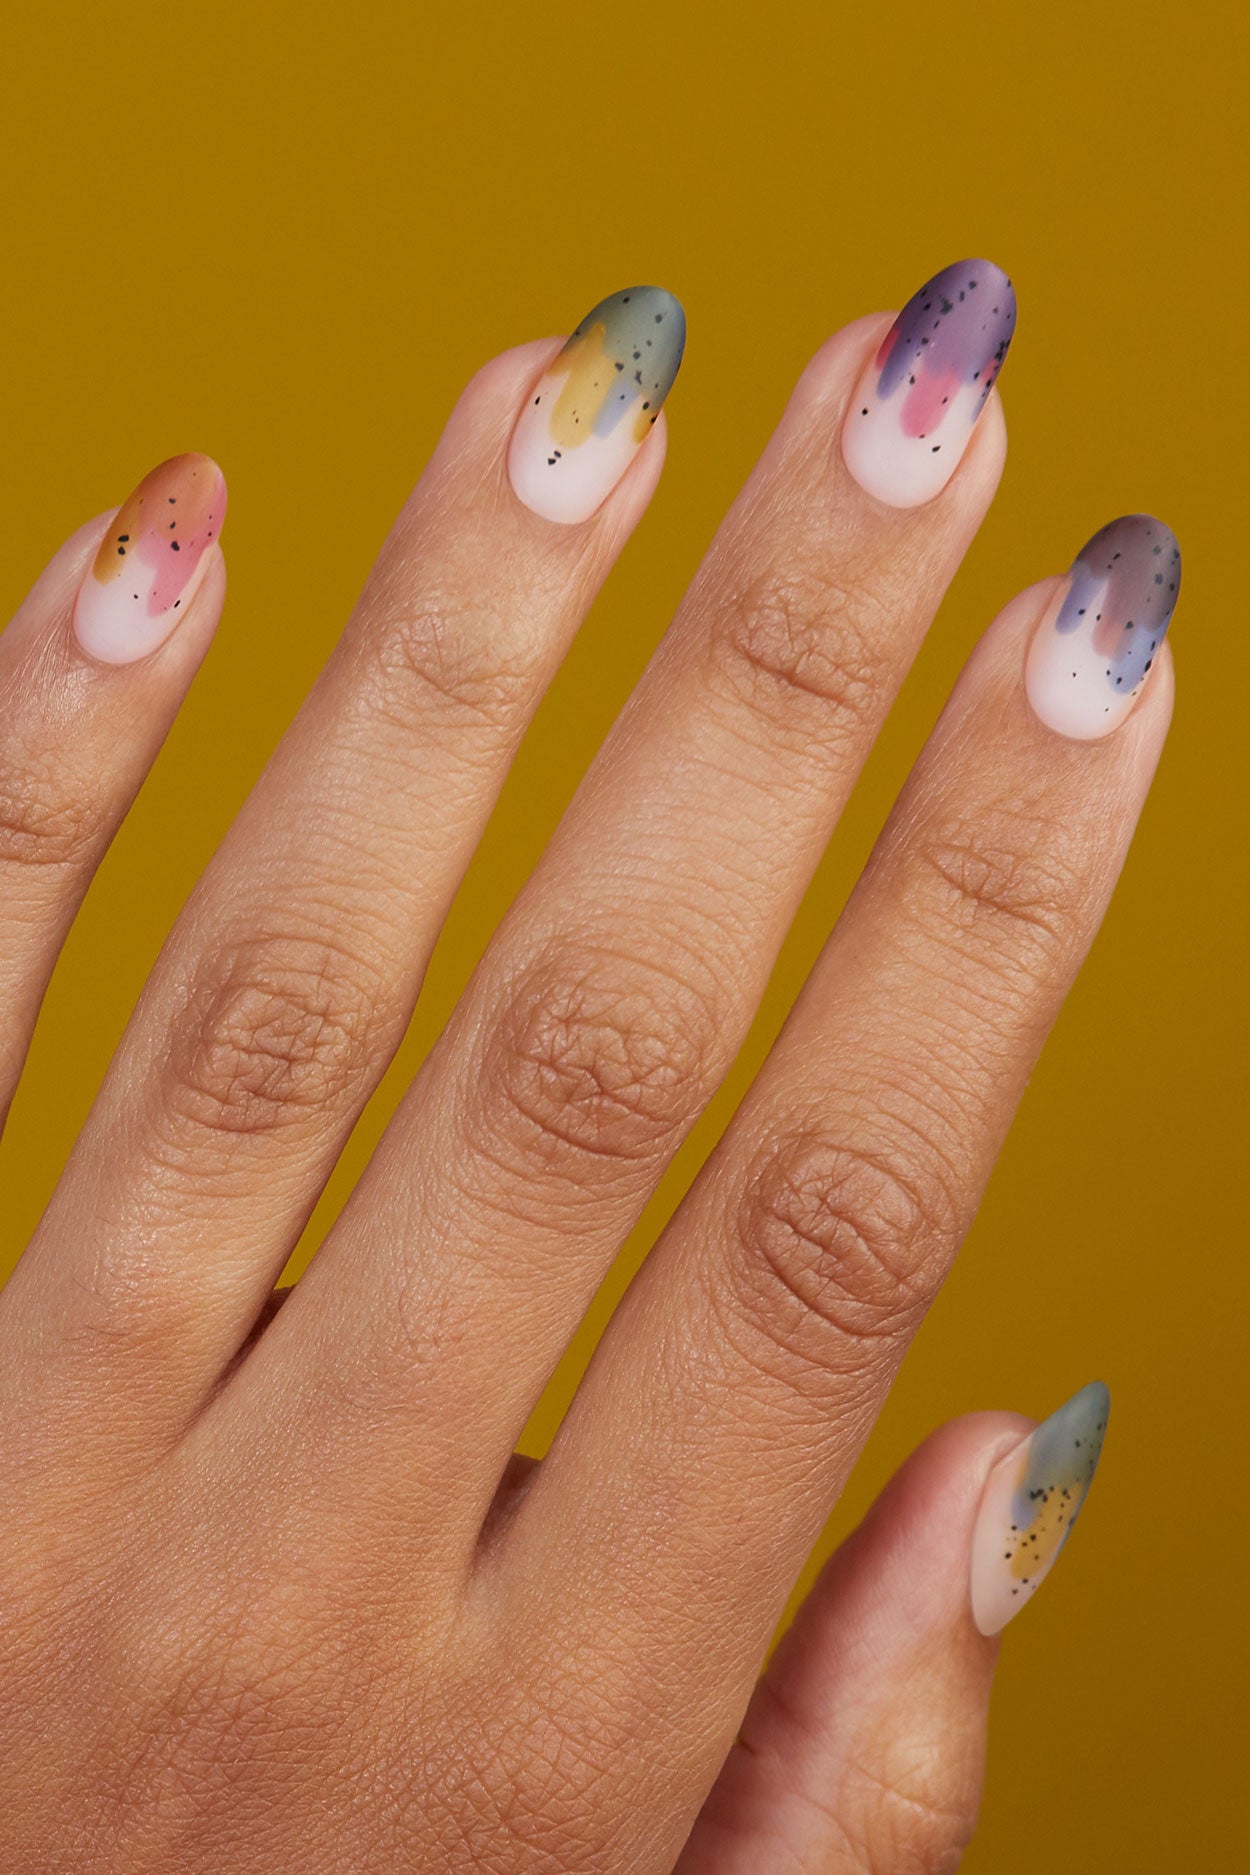 What are aura nails? See the trippy manicure trend taking over social media